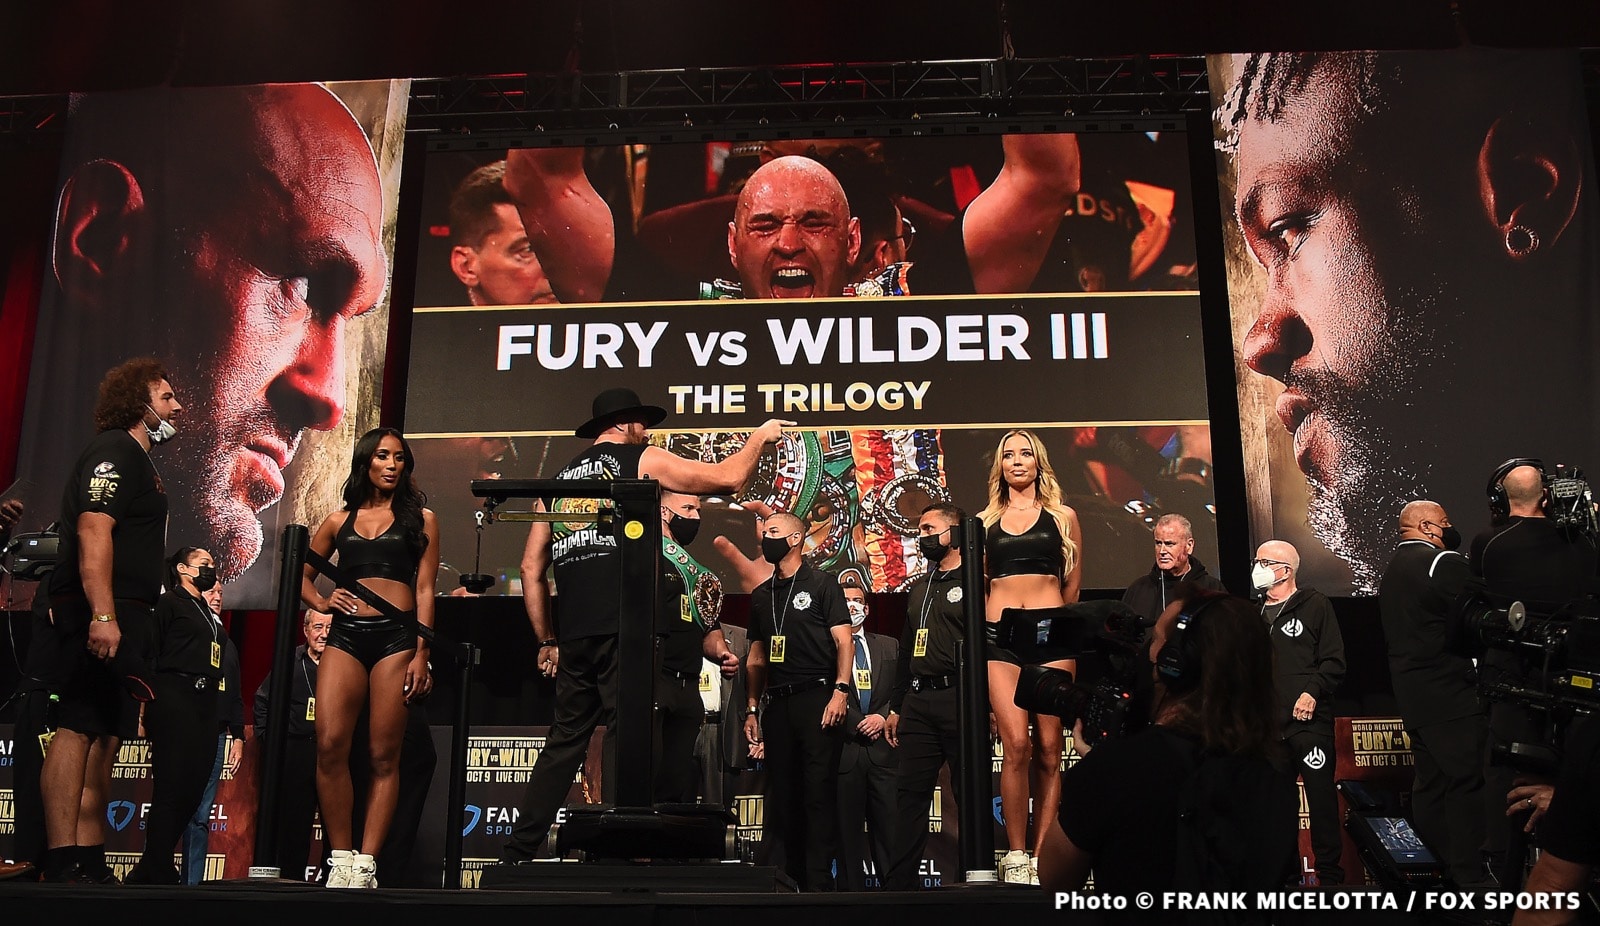 Image: Wilder says he'll get "Dirtier" if Fury starts fouling tonight